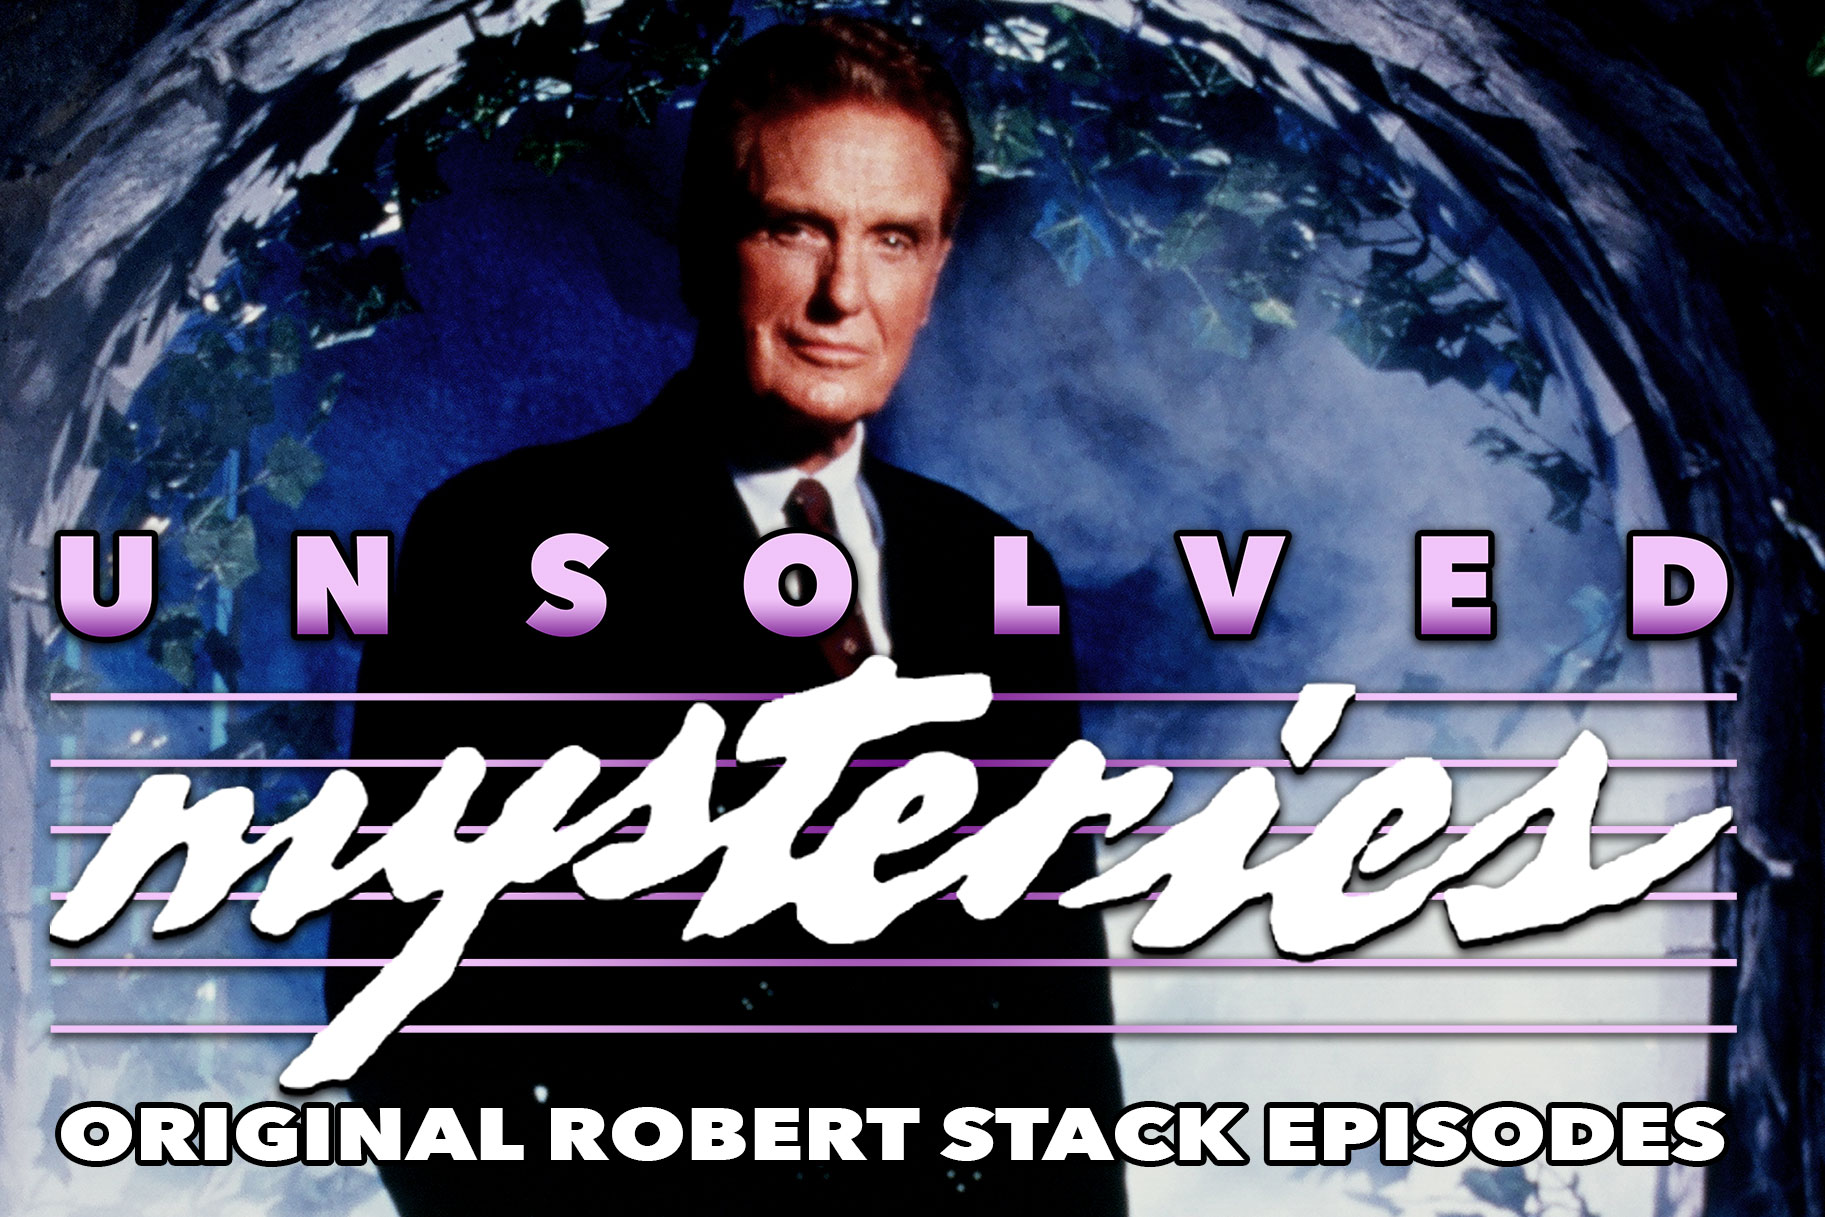 The True Stories Behind the New Season of 'Unsolved Mysteries"